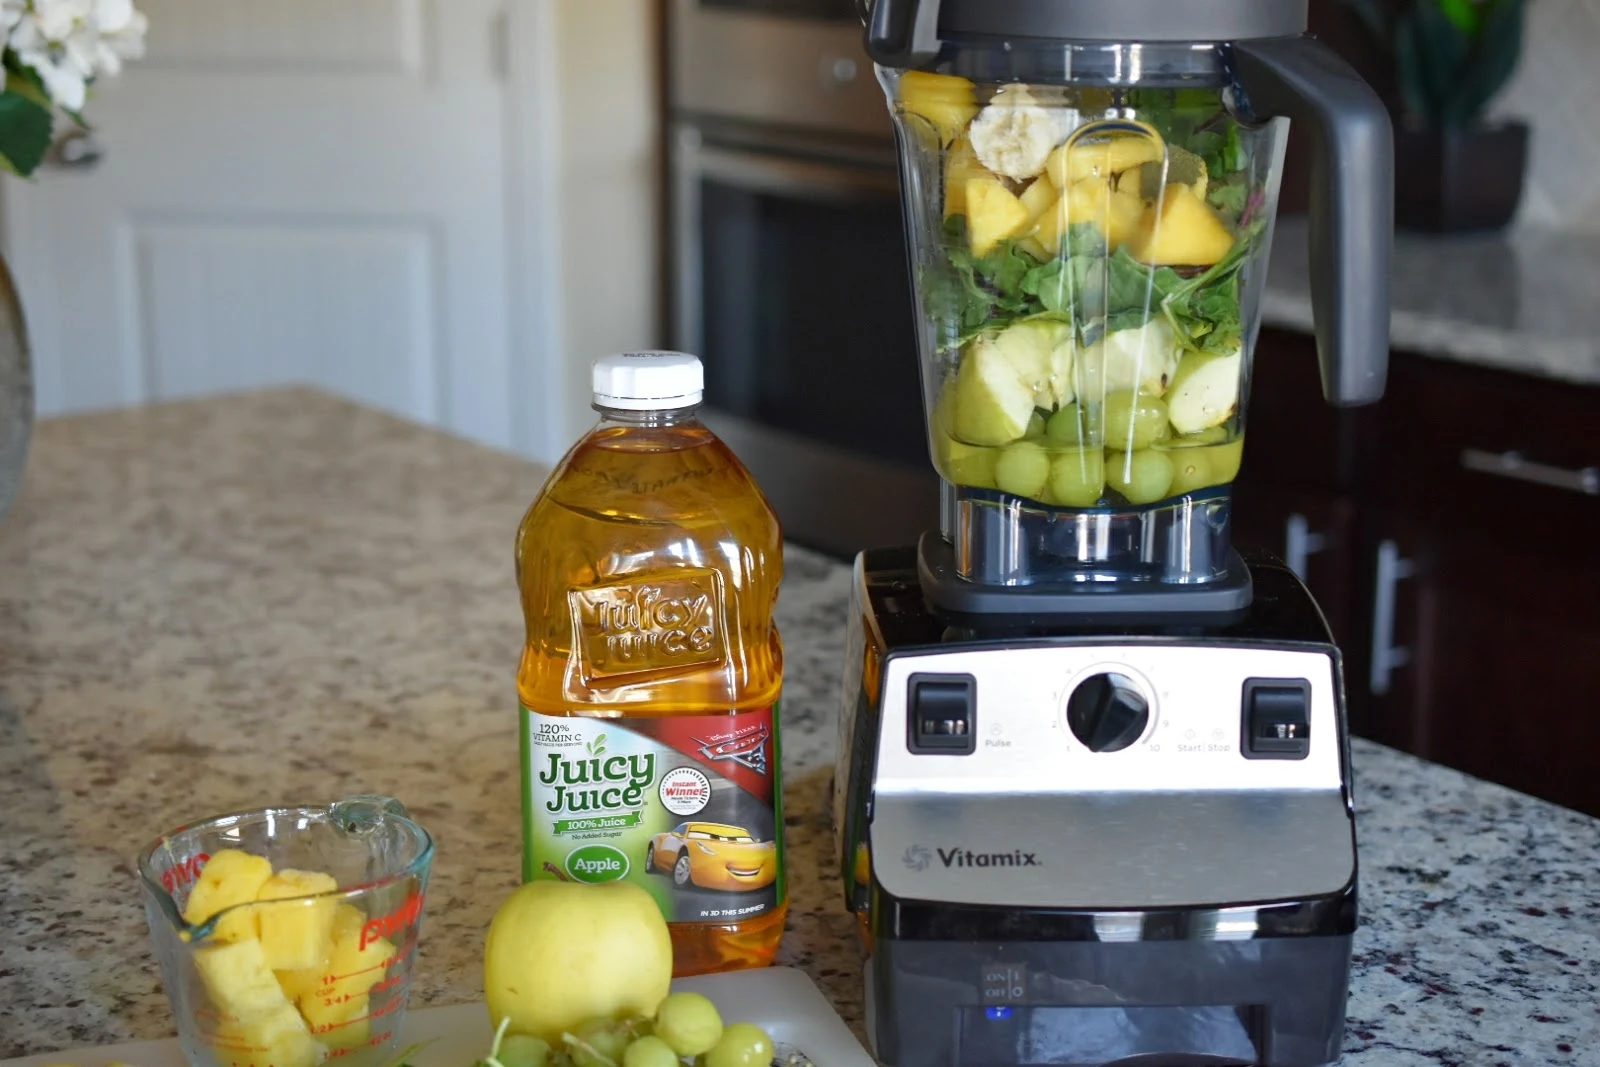 Healthy Summer Drink: Green Smoothie Recipe  via  www.productreviewmom.com